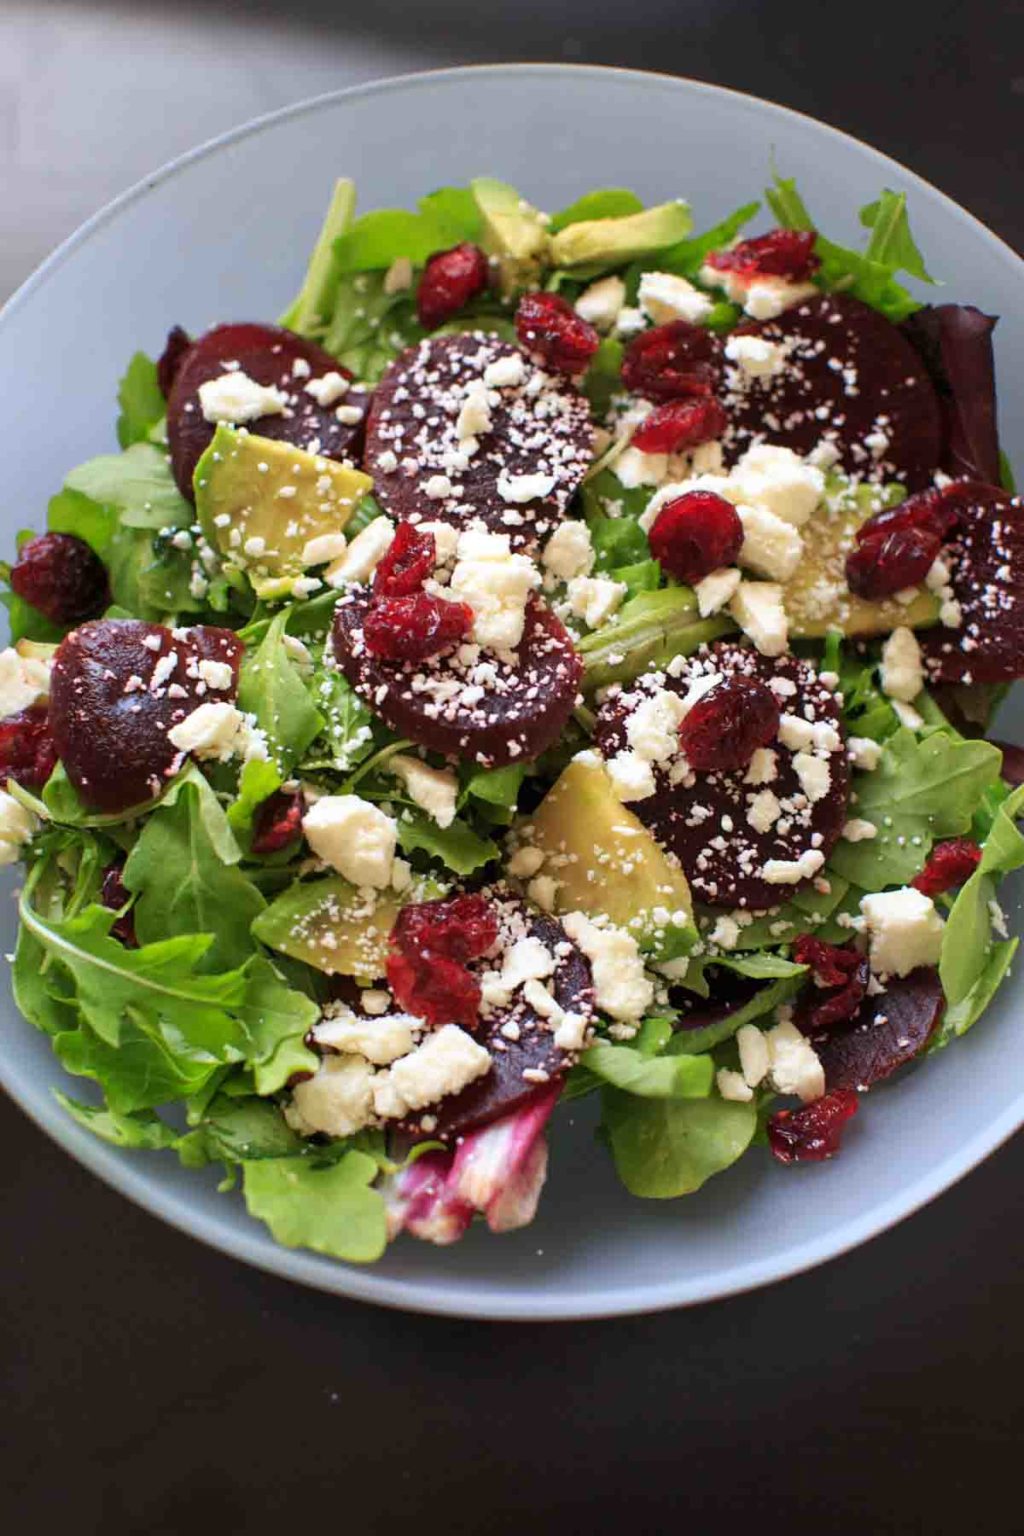 Roasted Beet Salad with Honey Balsamic Vinaigrette. A flavorful and healthy salad that is anything but boring!